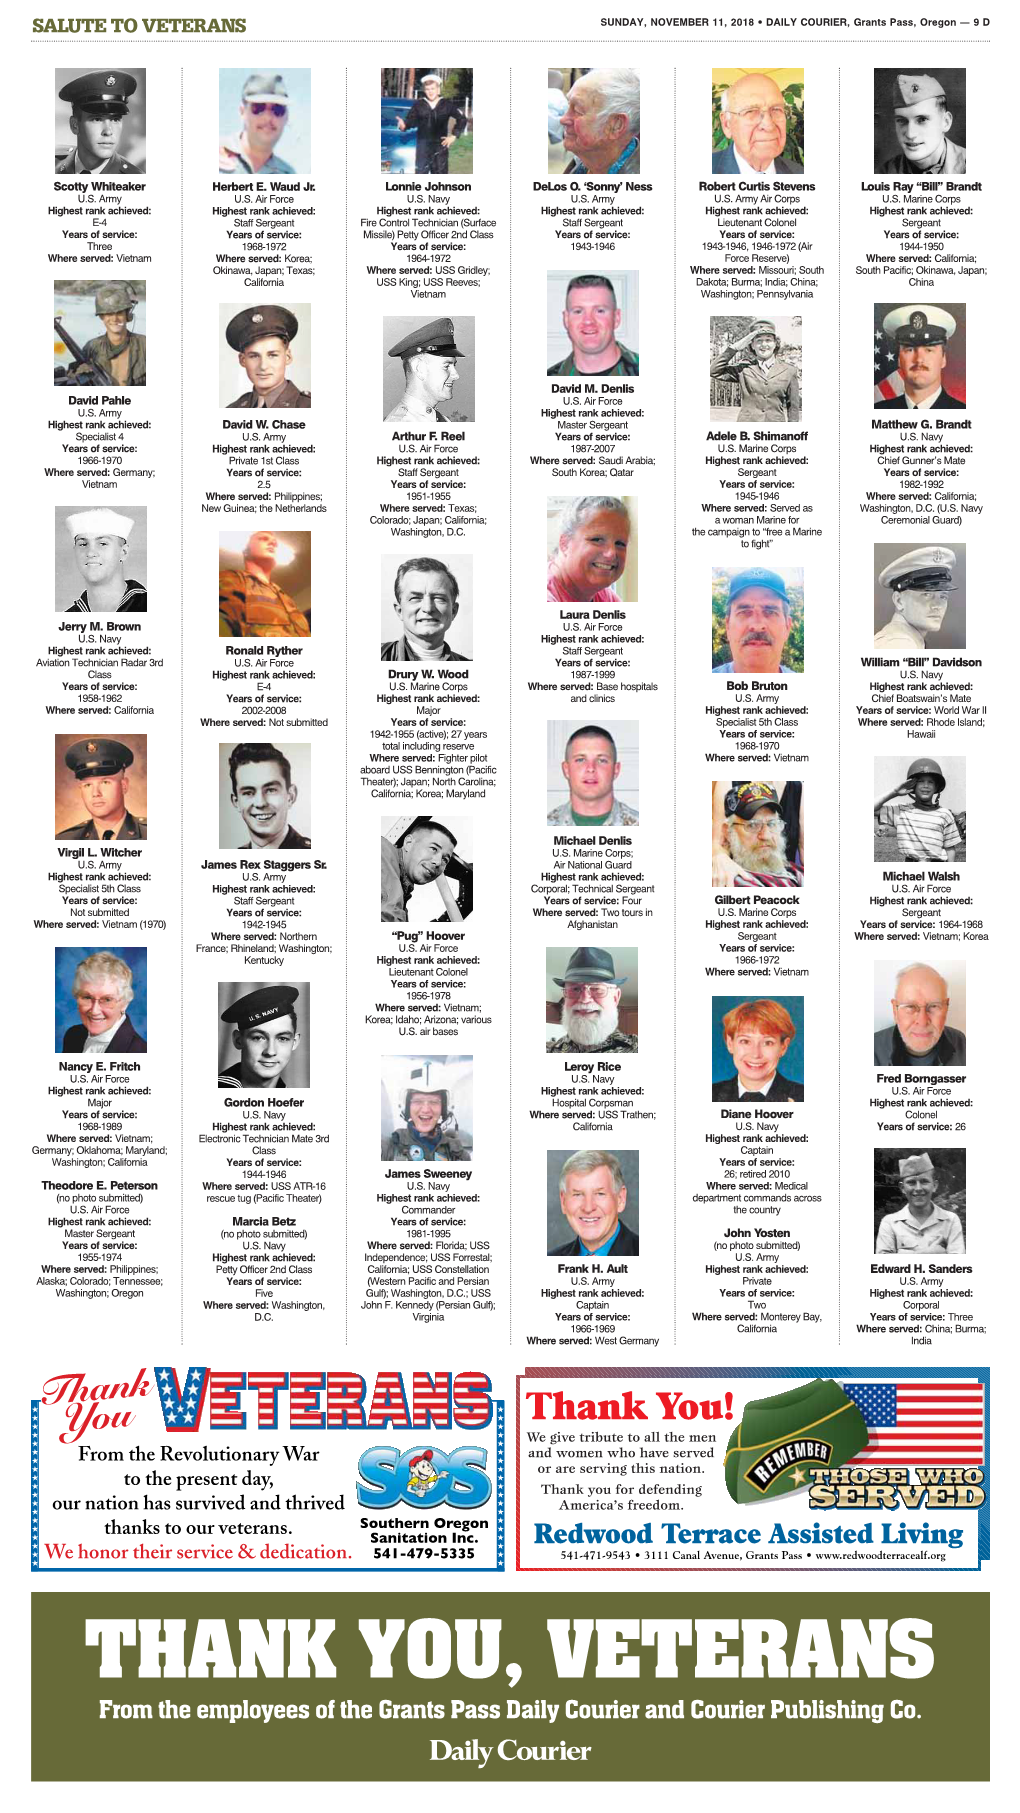 THANK YOU, VETERANS from the Employees of the Grants Pass Daily Courier and Courier Publishing Co